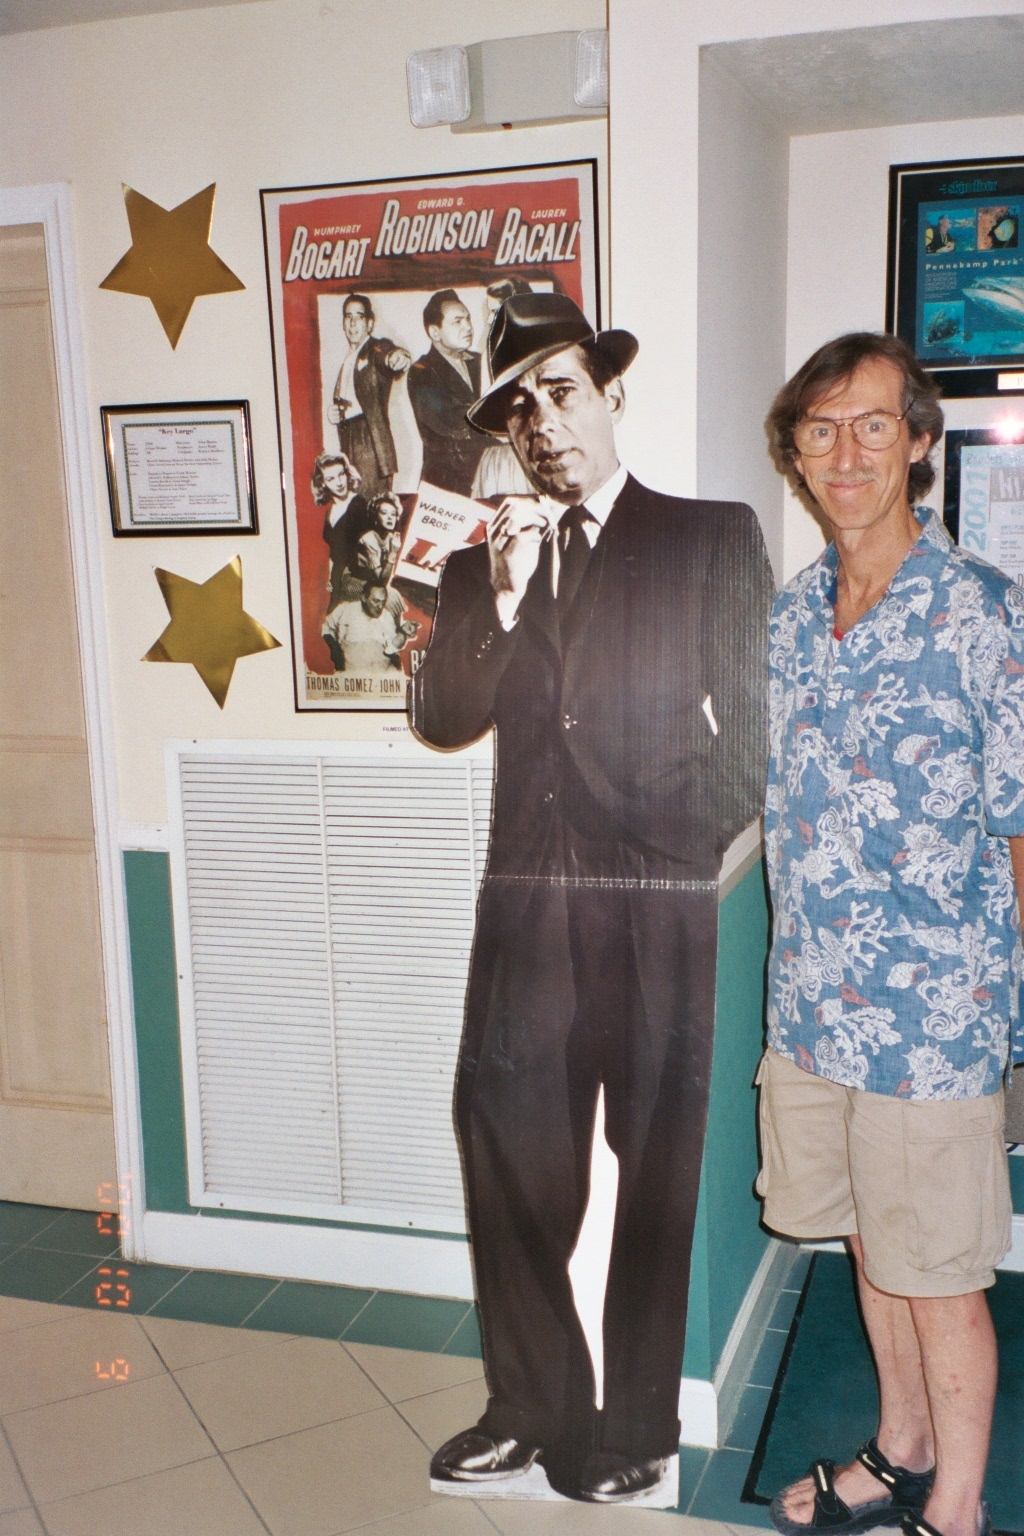 Me and Bogie at Key Largo